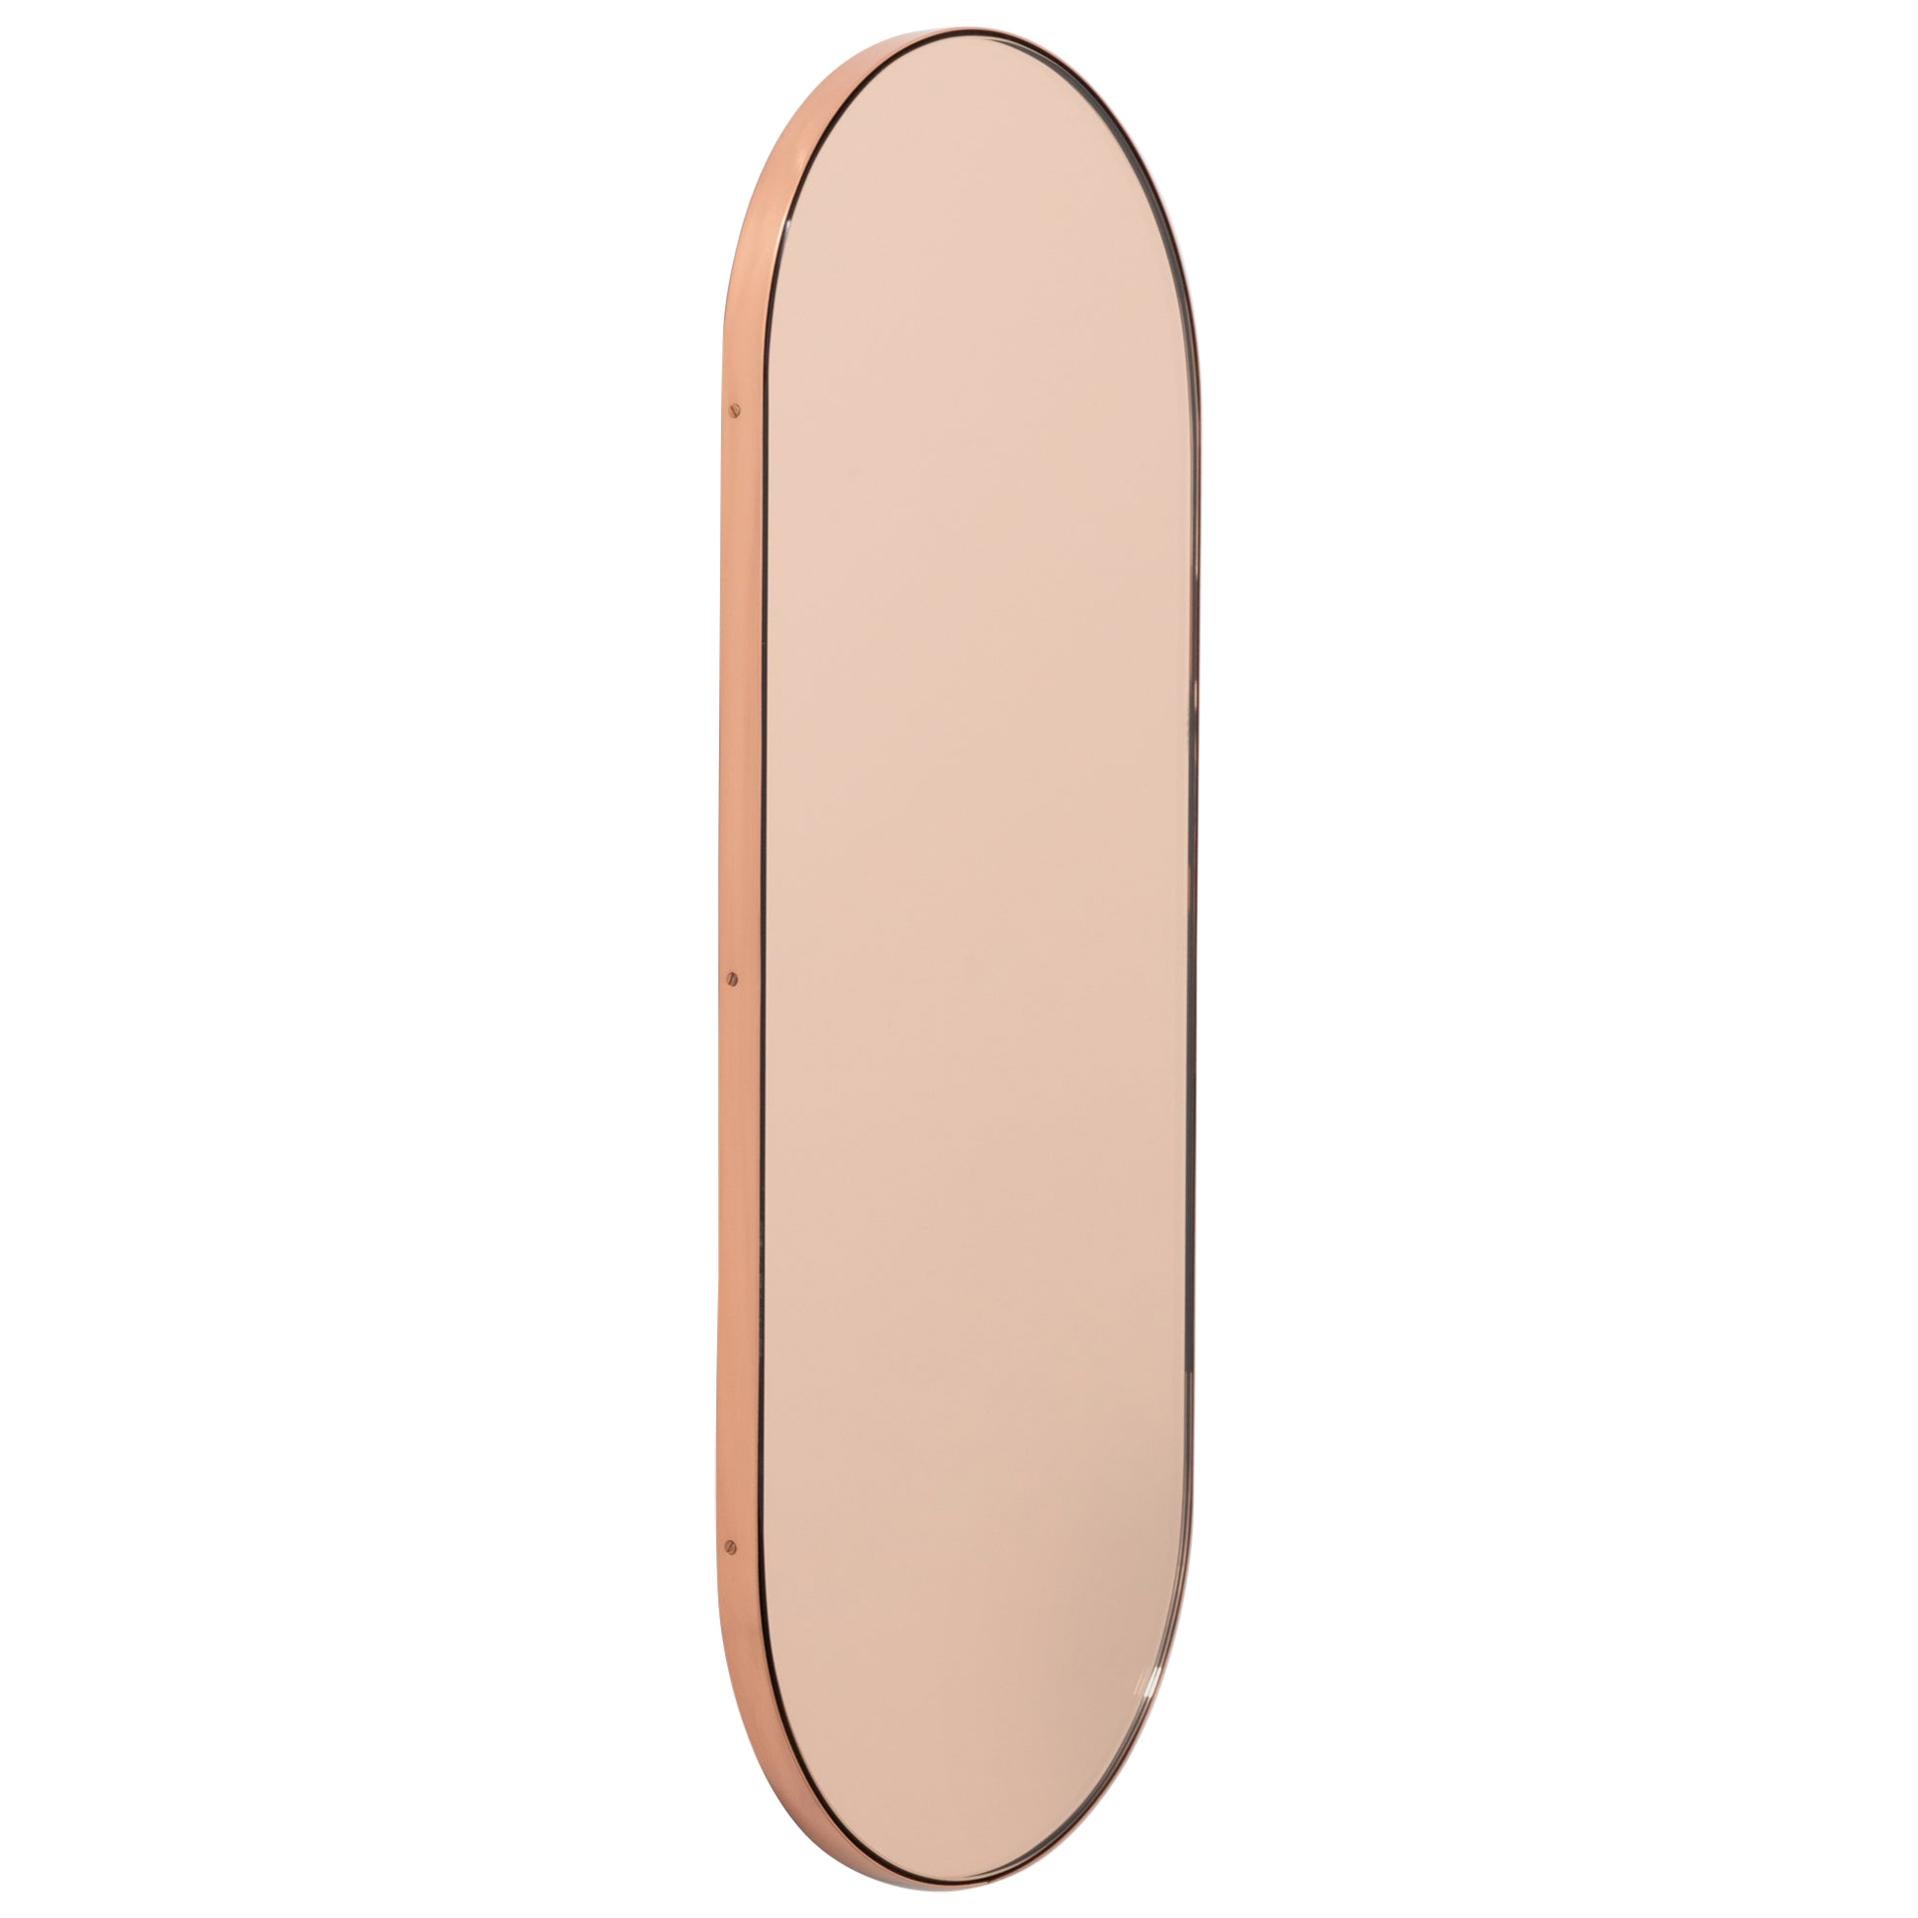 Capsula Capsule Shaped Rose Gold Mirror with Copper Frame, Medium For Sale